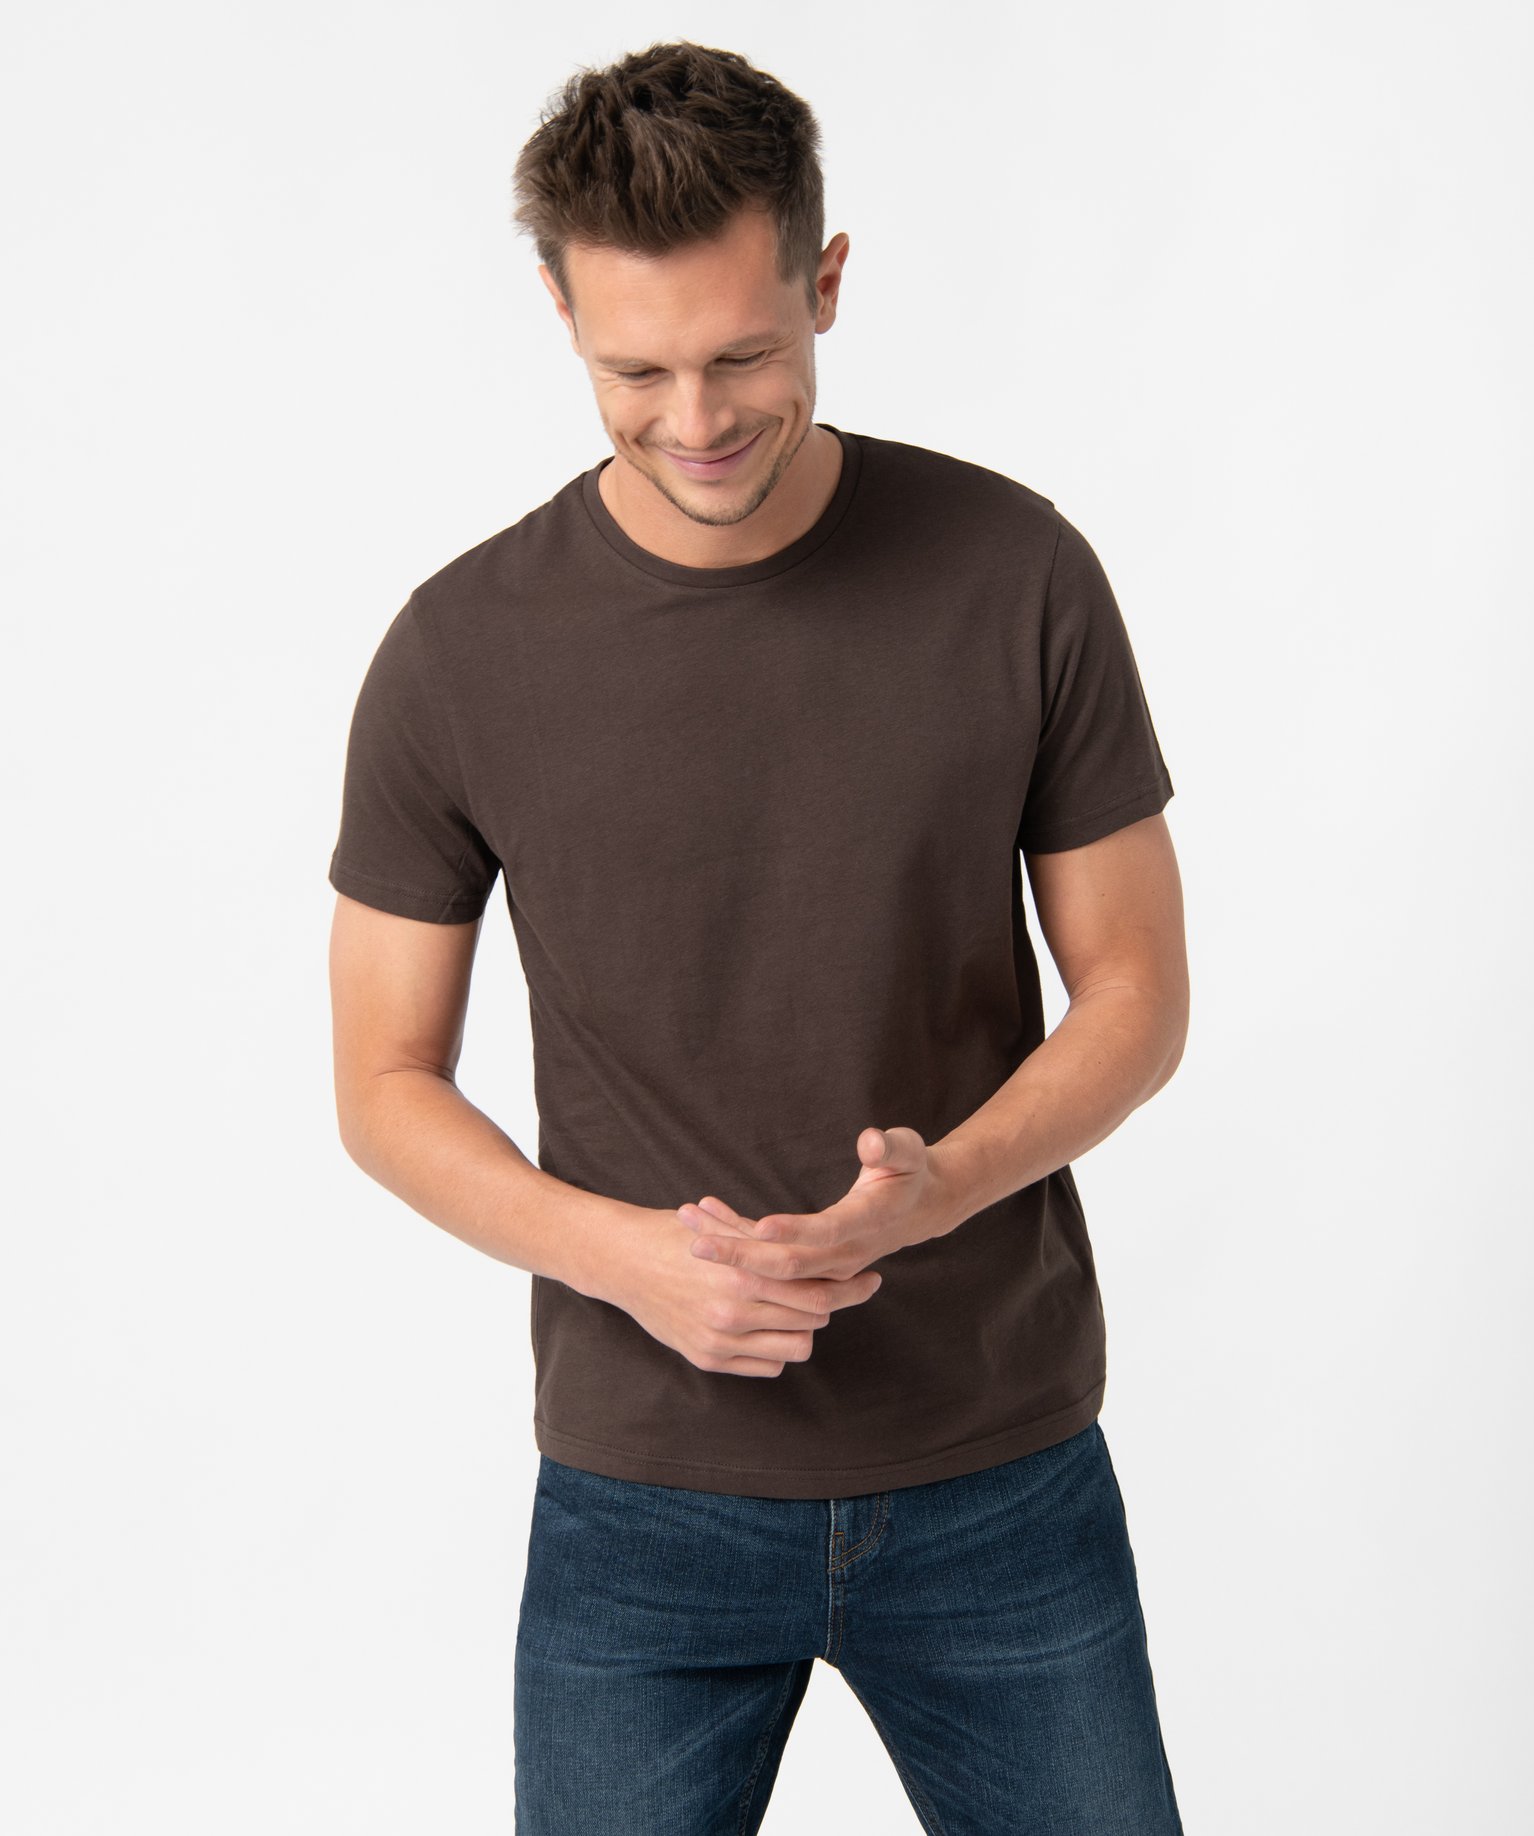 tee-shirt homme a manches courtes et col rond brun tee-shirts